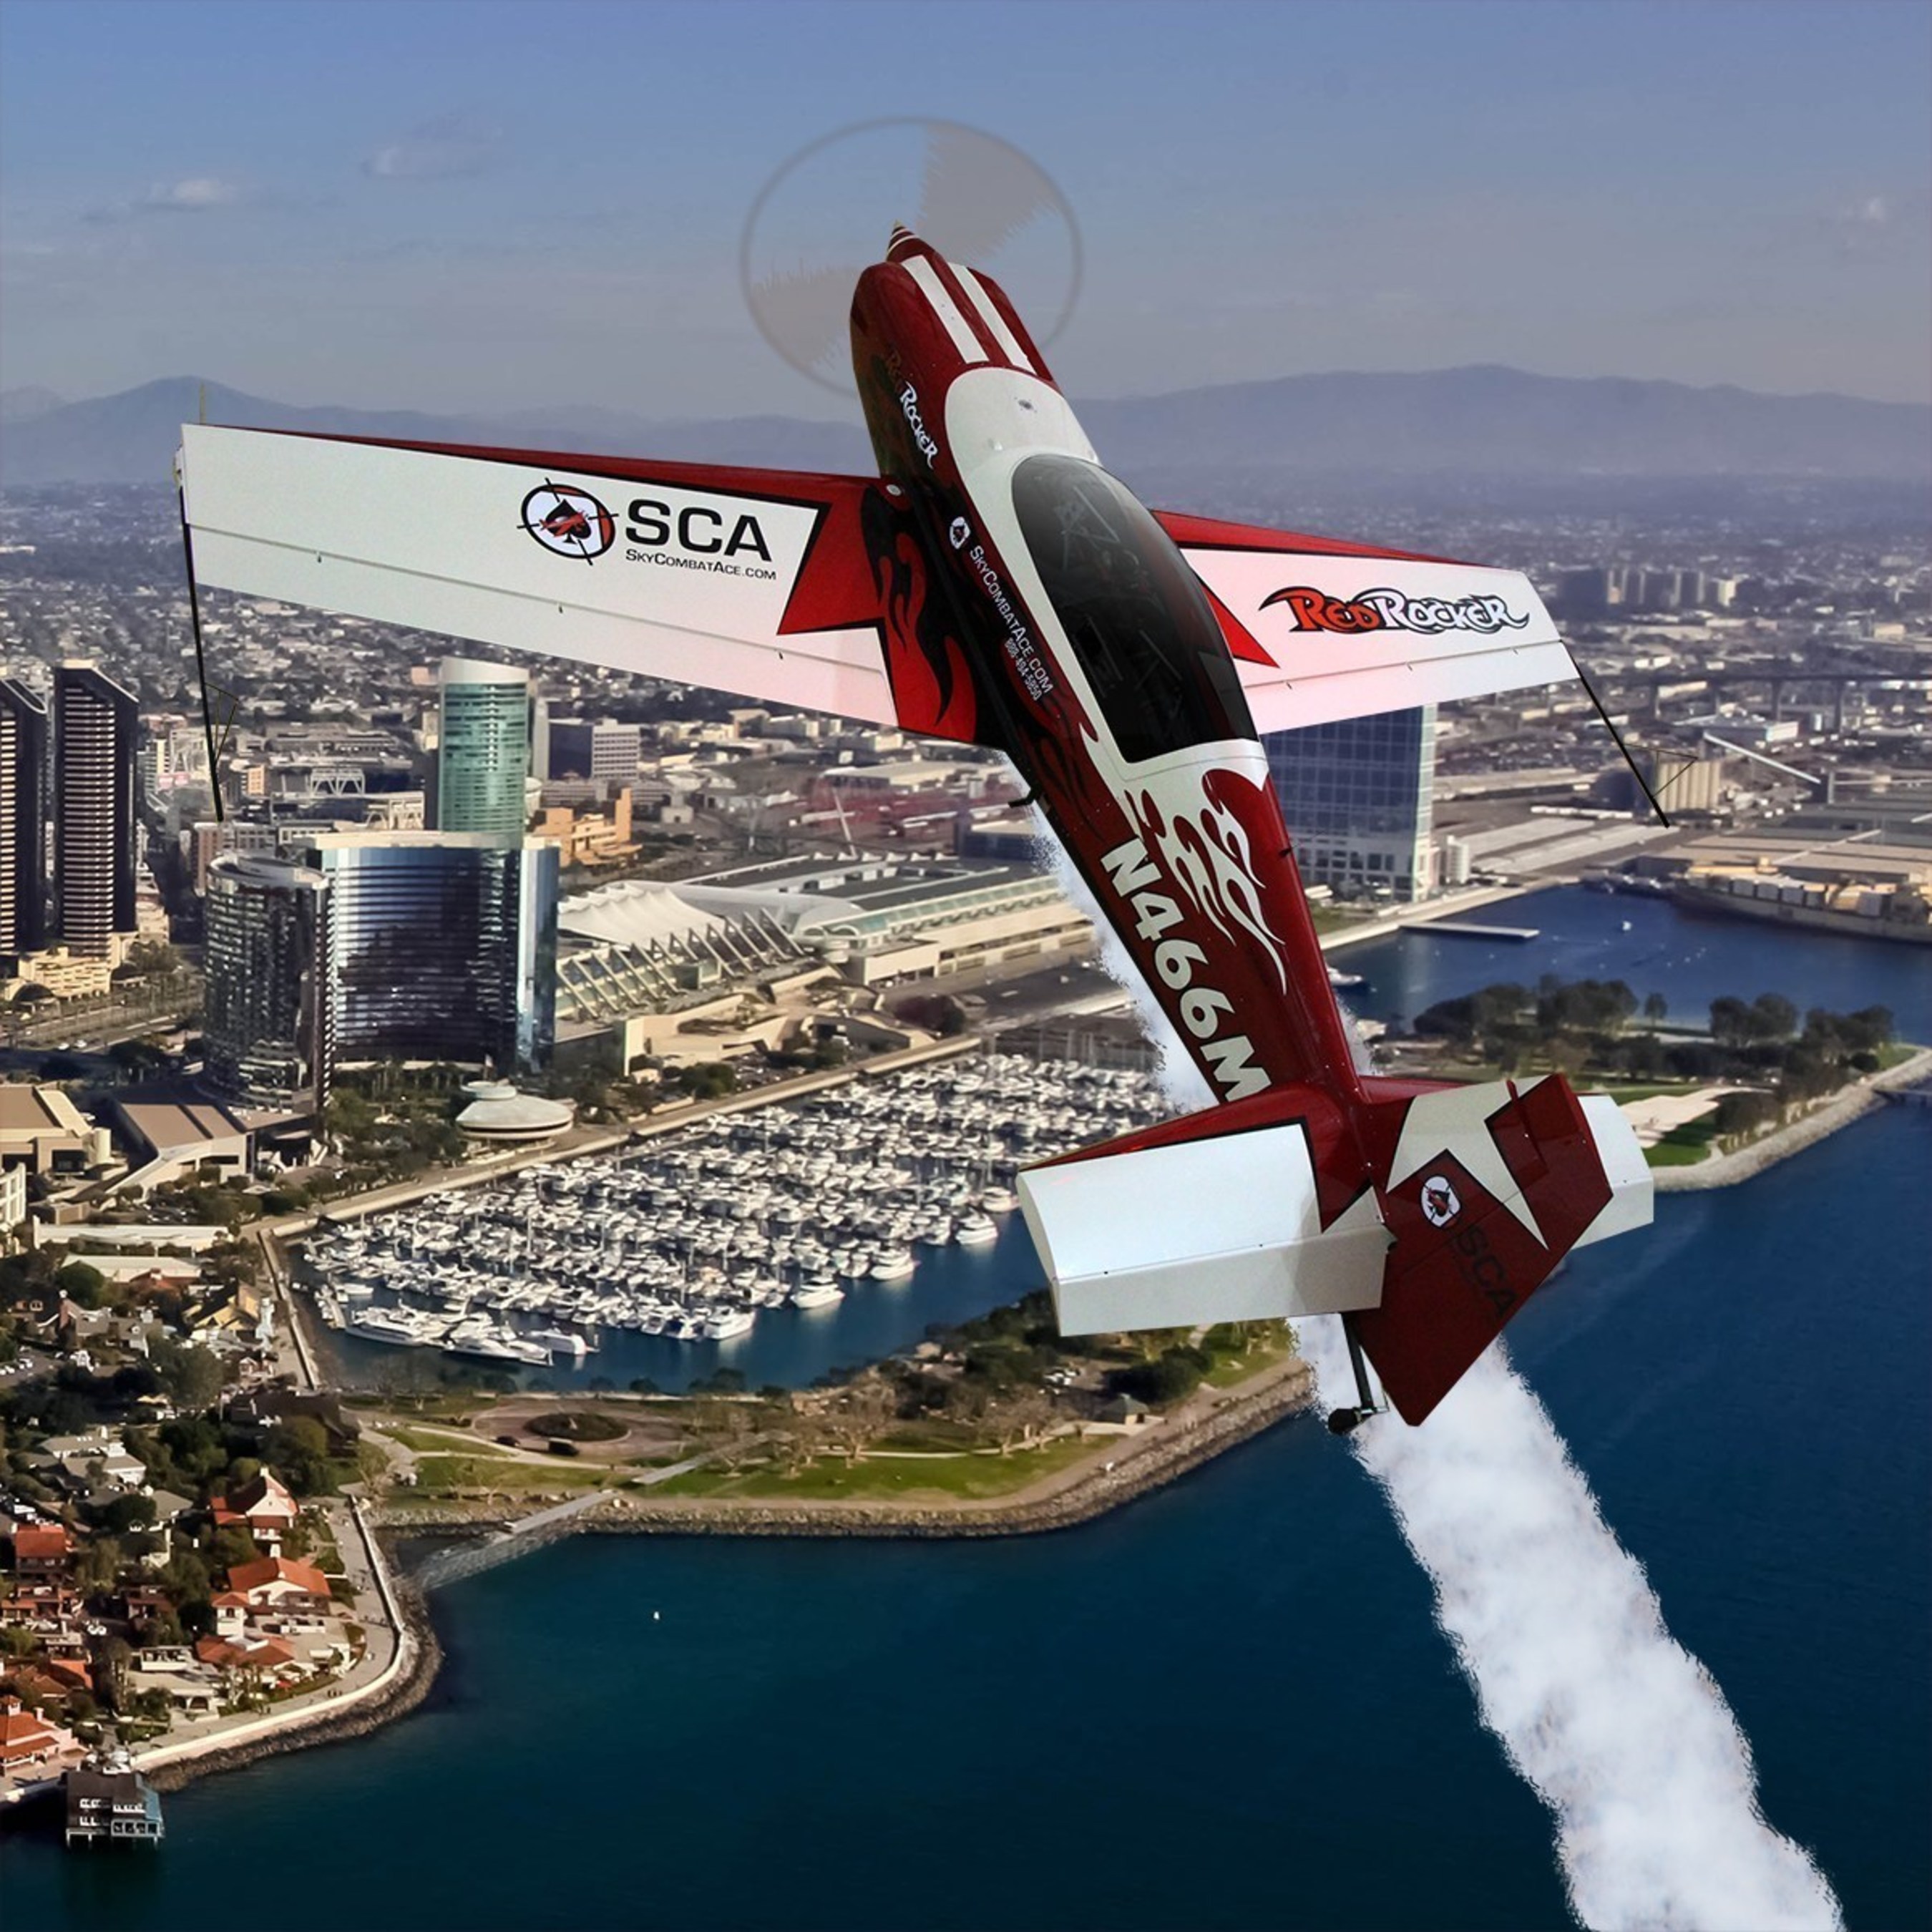 Enjoy the adventure-of-a-lifetime with Sky Combat Ace (SCA), as you suit up for a wild acrobatic flight of non-stop spins, barrel rolls, hammerheads and loops high above the San Diego coastline.